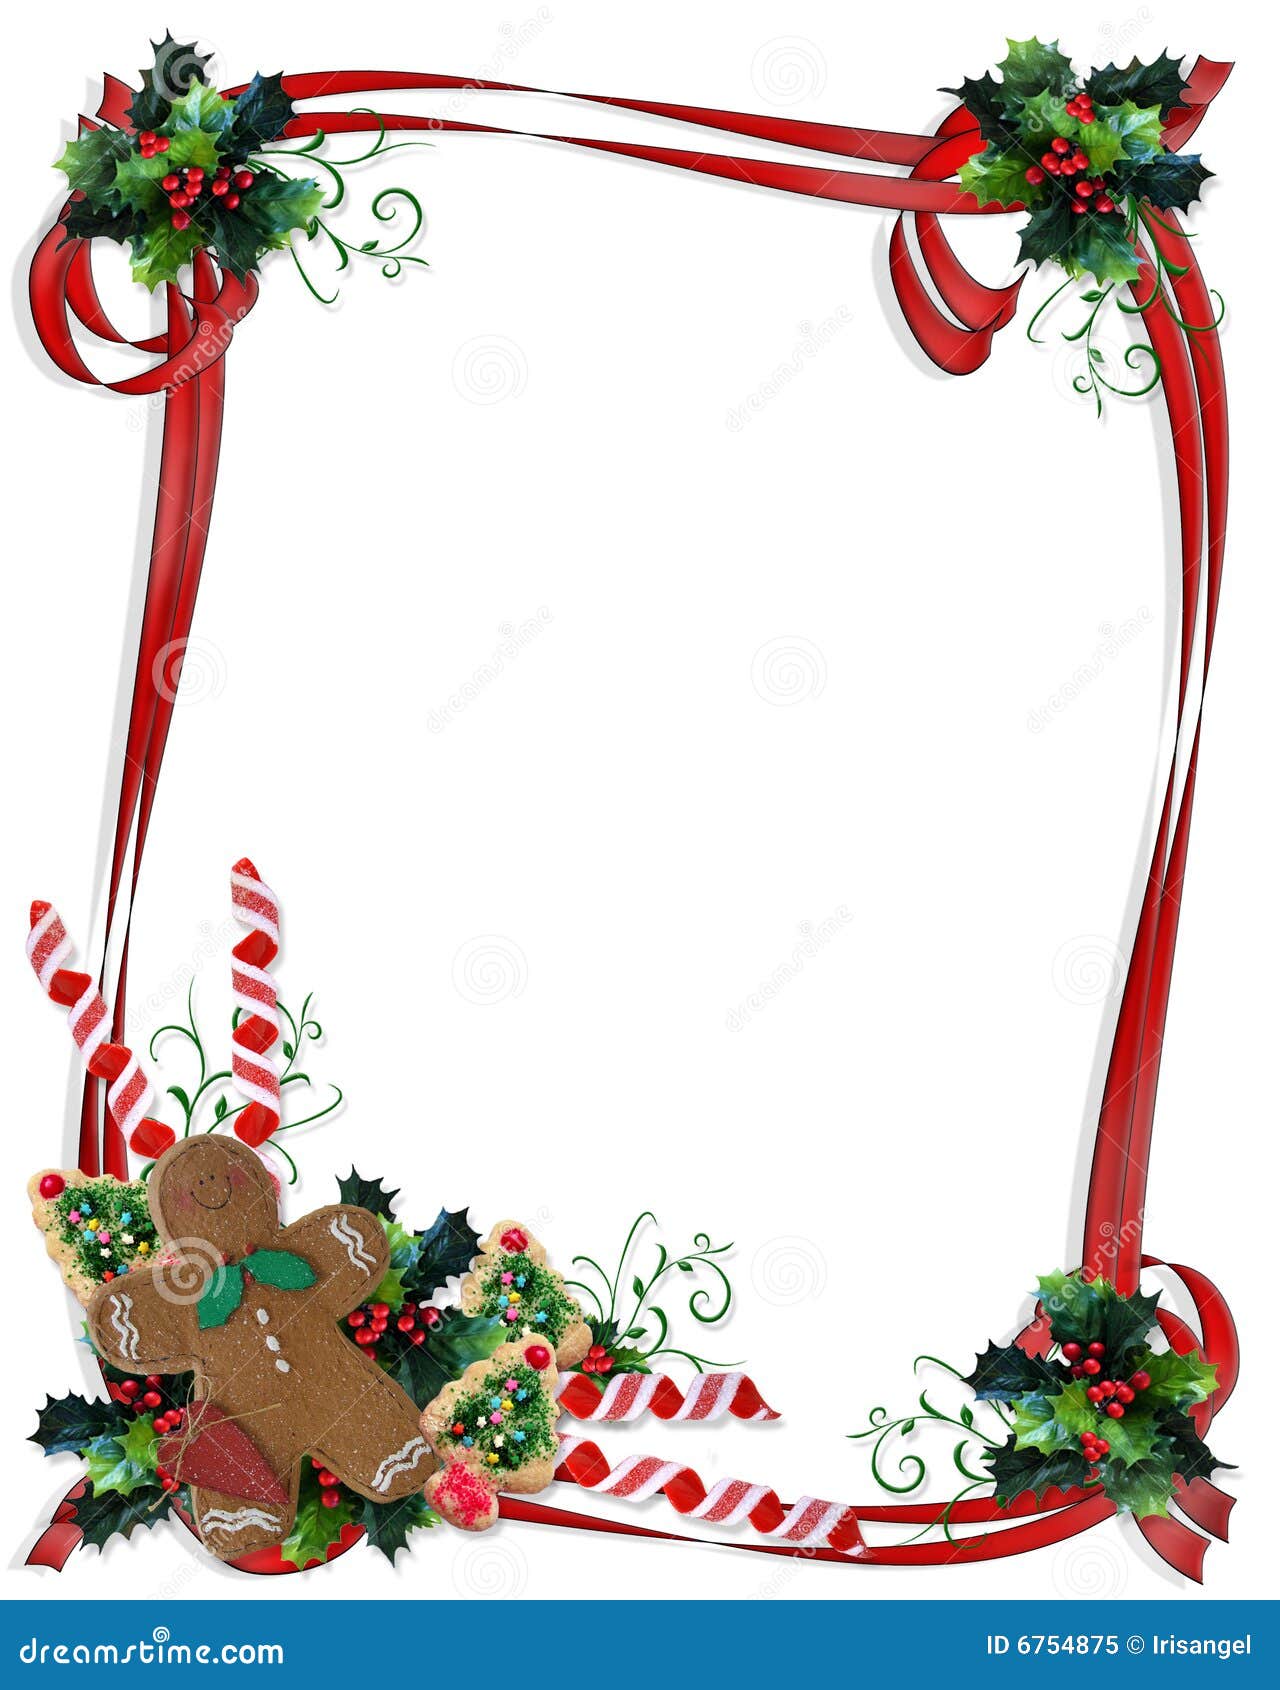 christmas clipart borders backgrounds - photo #35